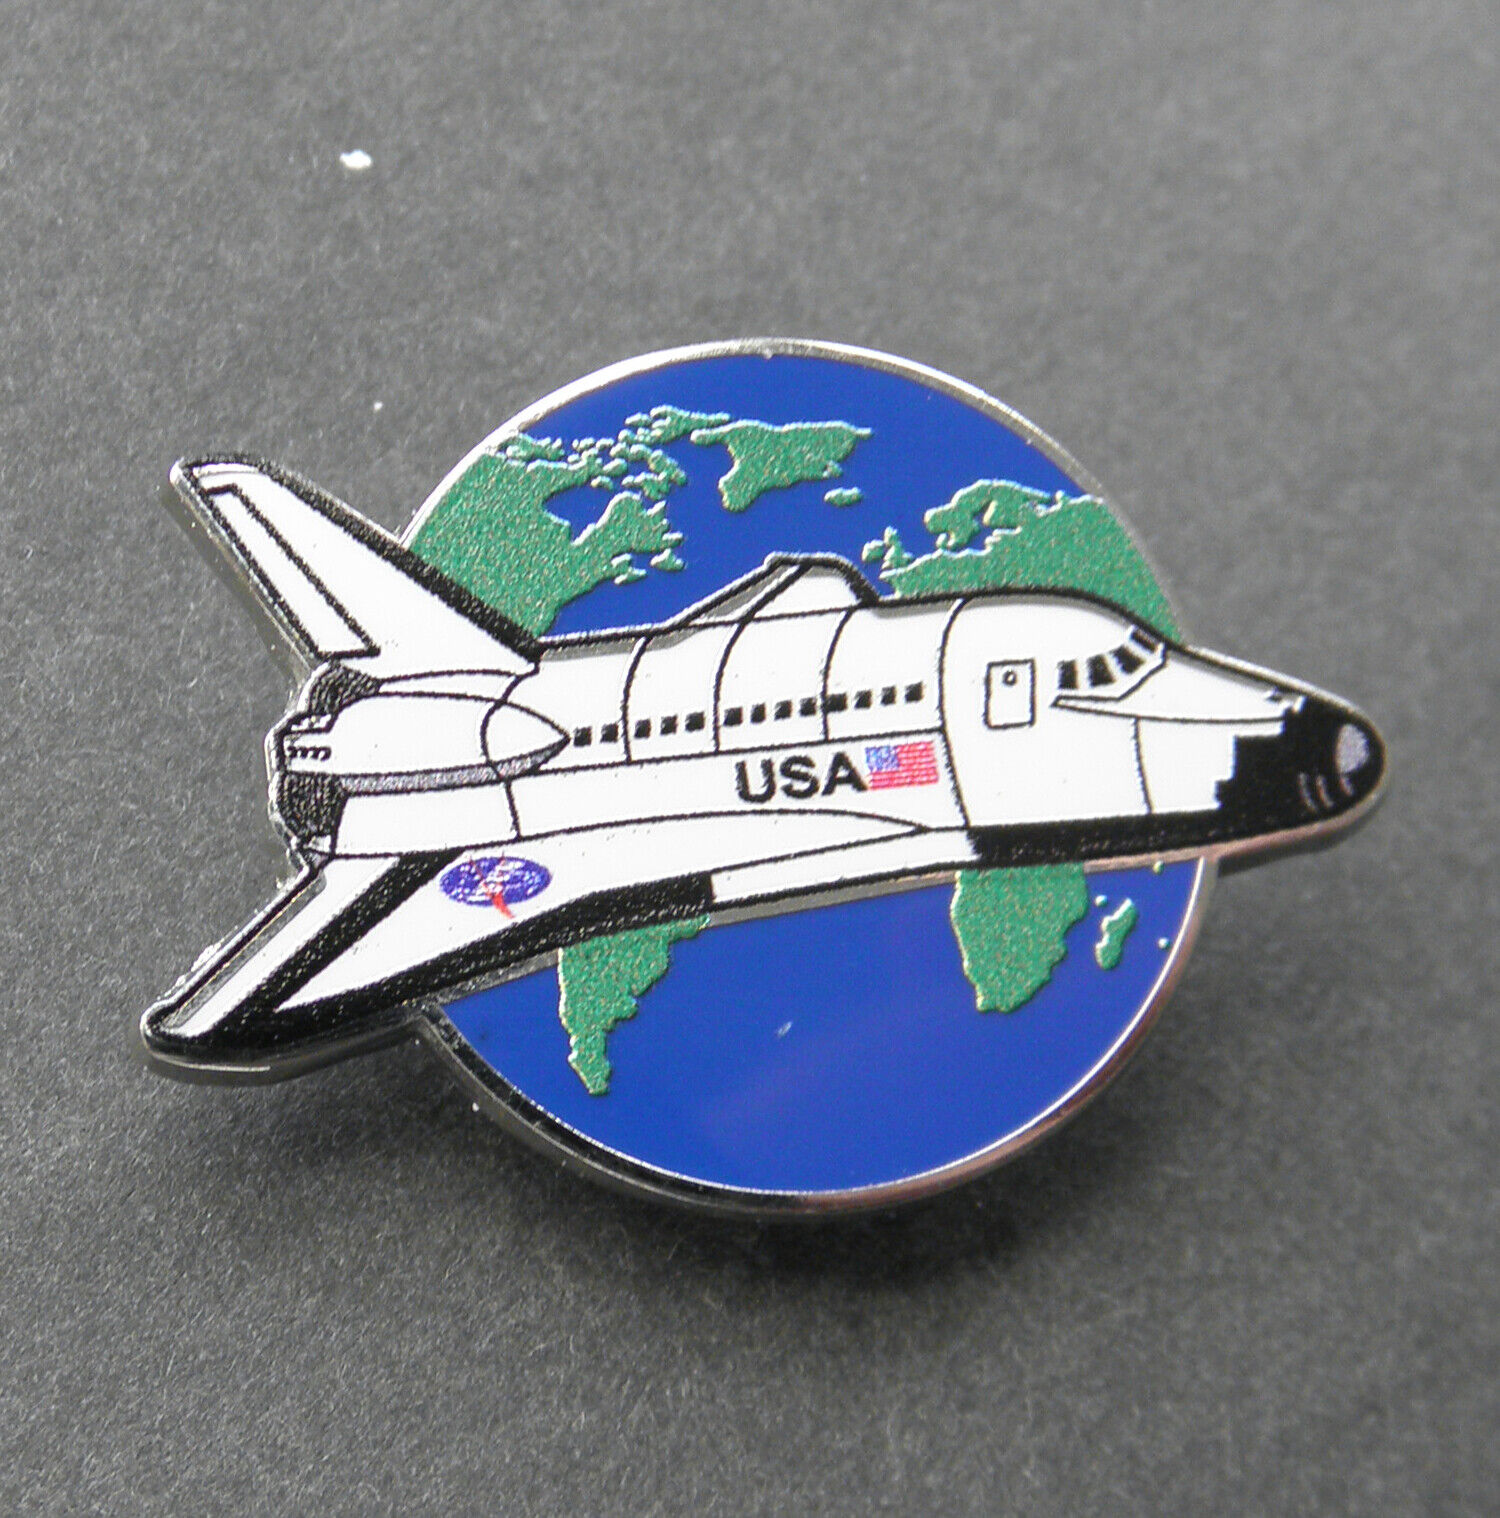 SPACE SHUTTLE NASA LAPEL PIN BADGE 1.25 INCHES